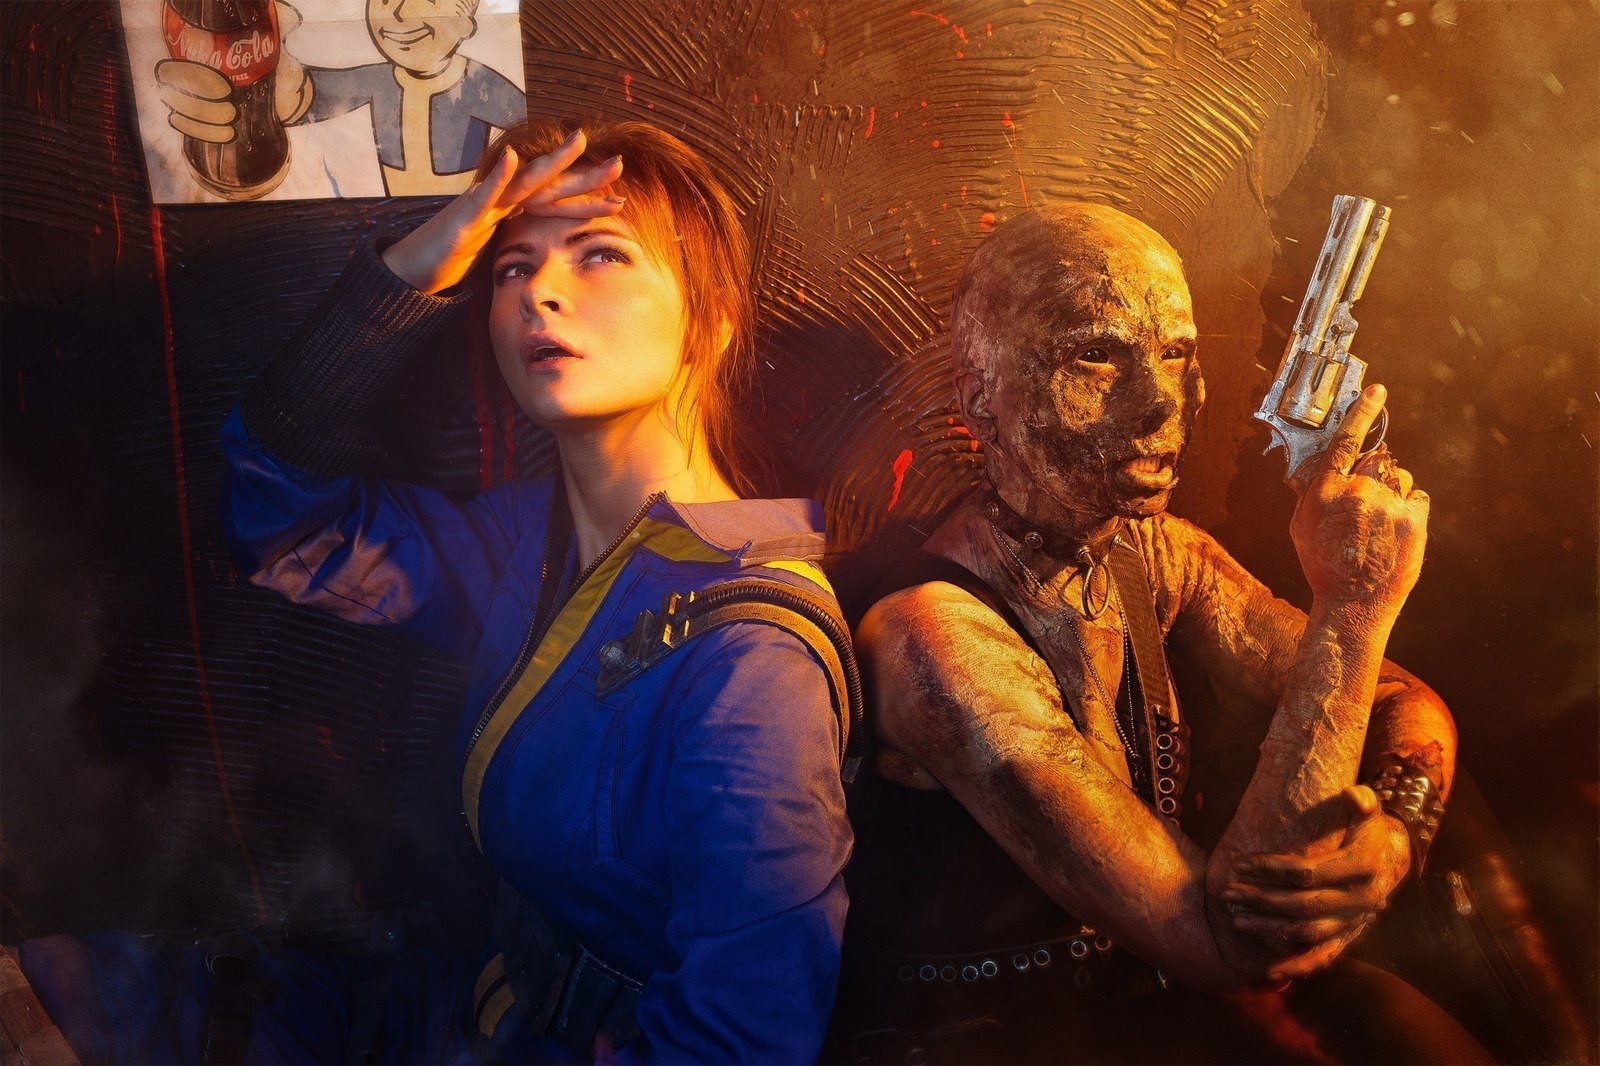 fallout 4 wallpaper,movie,cg artwork,action adventure game,fictional character,action film